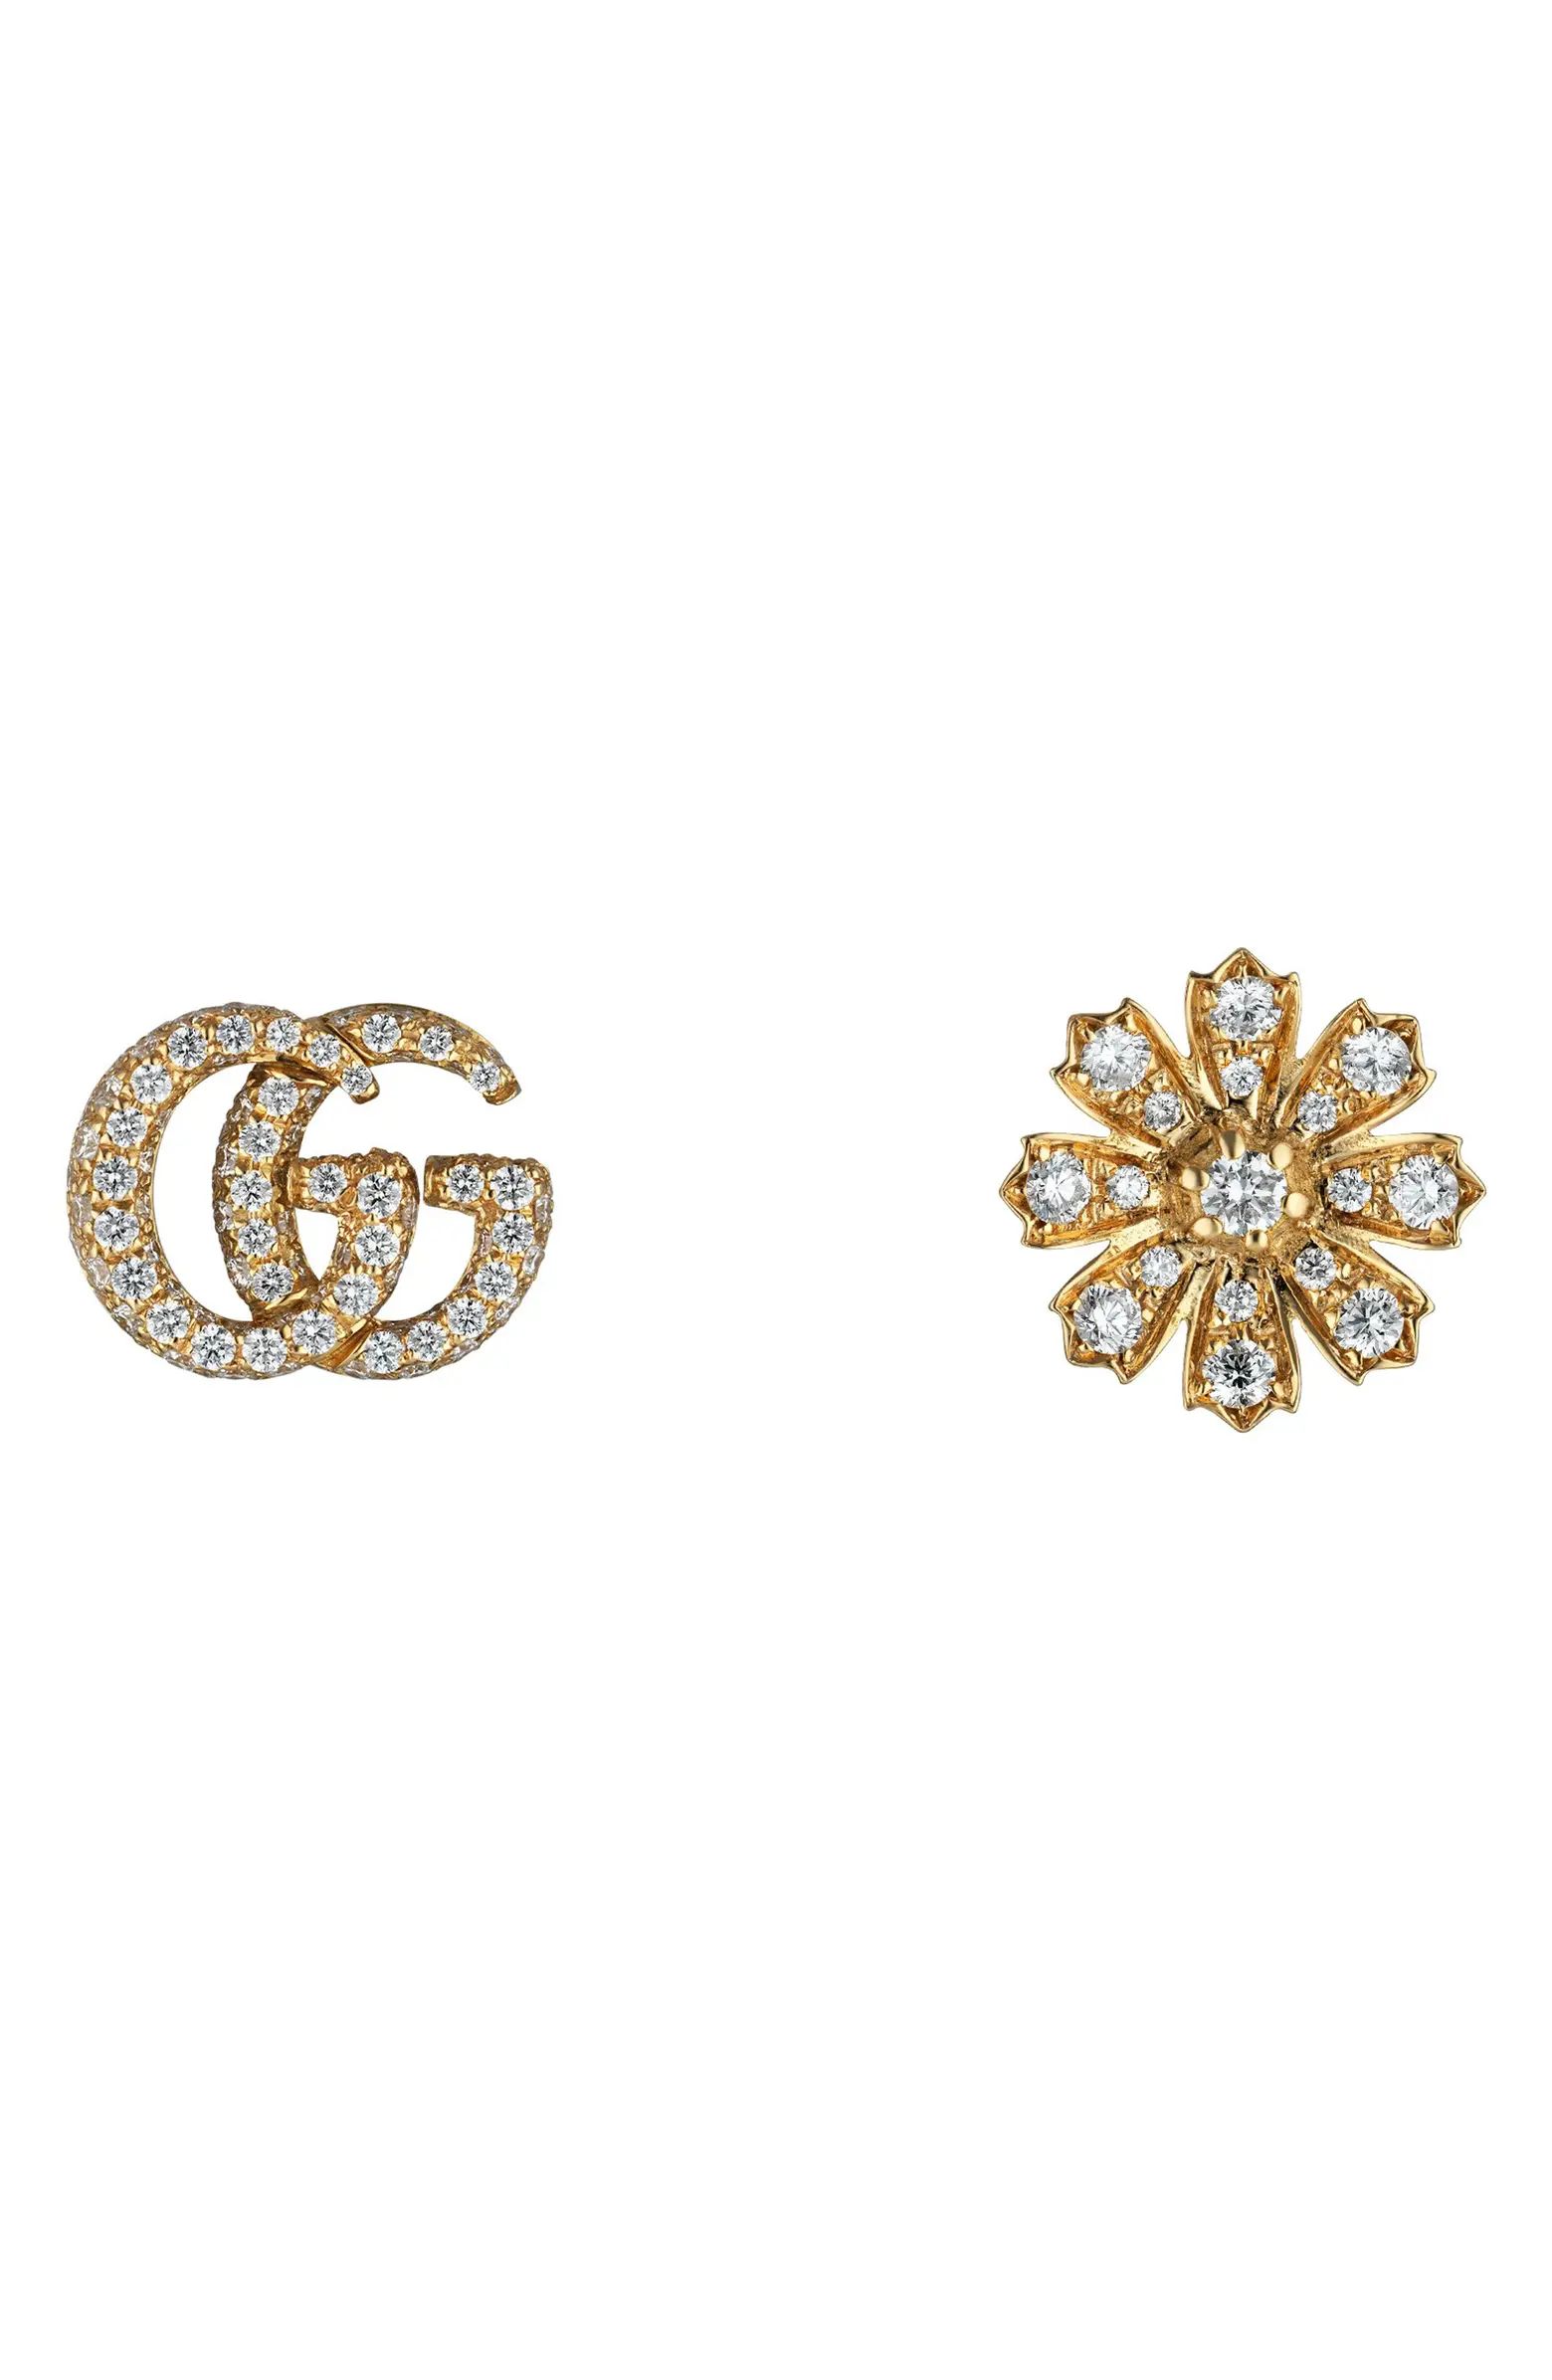 Mismatched Flora & Double-G Diamond Stud Earrings | Nordstrom